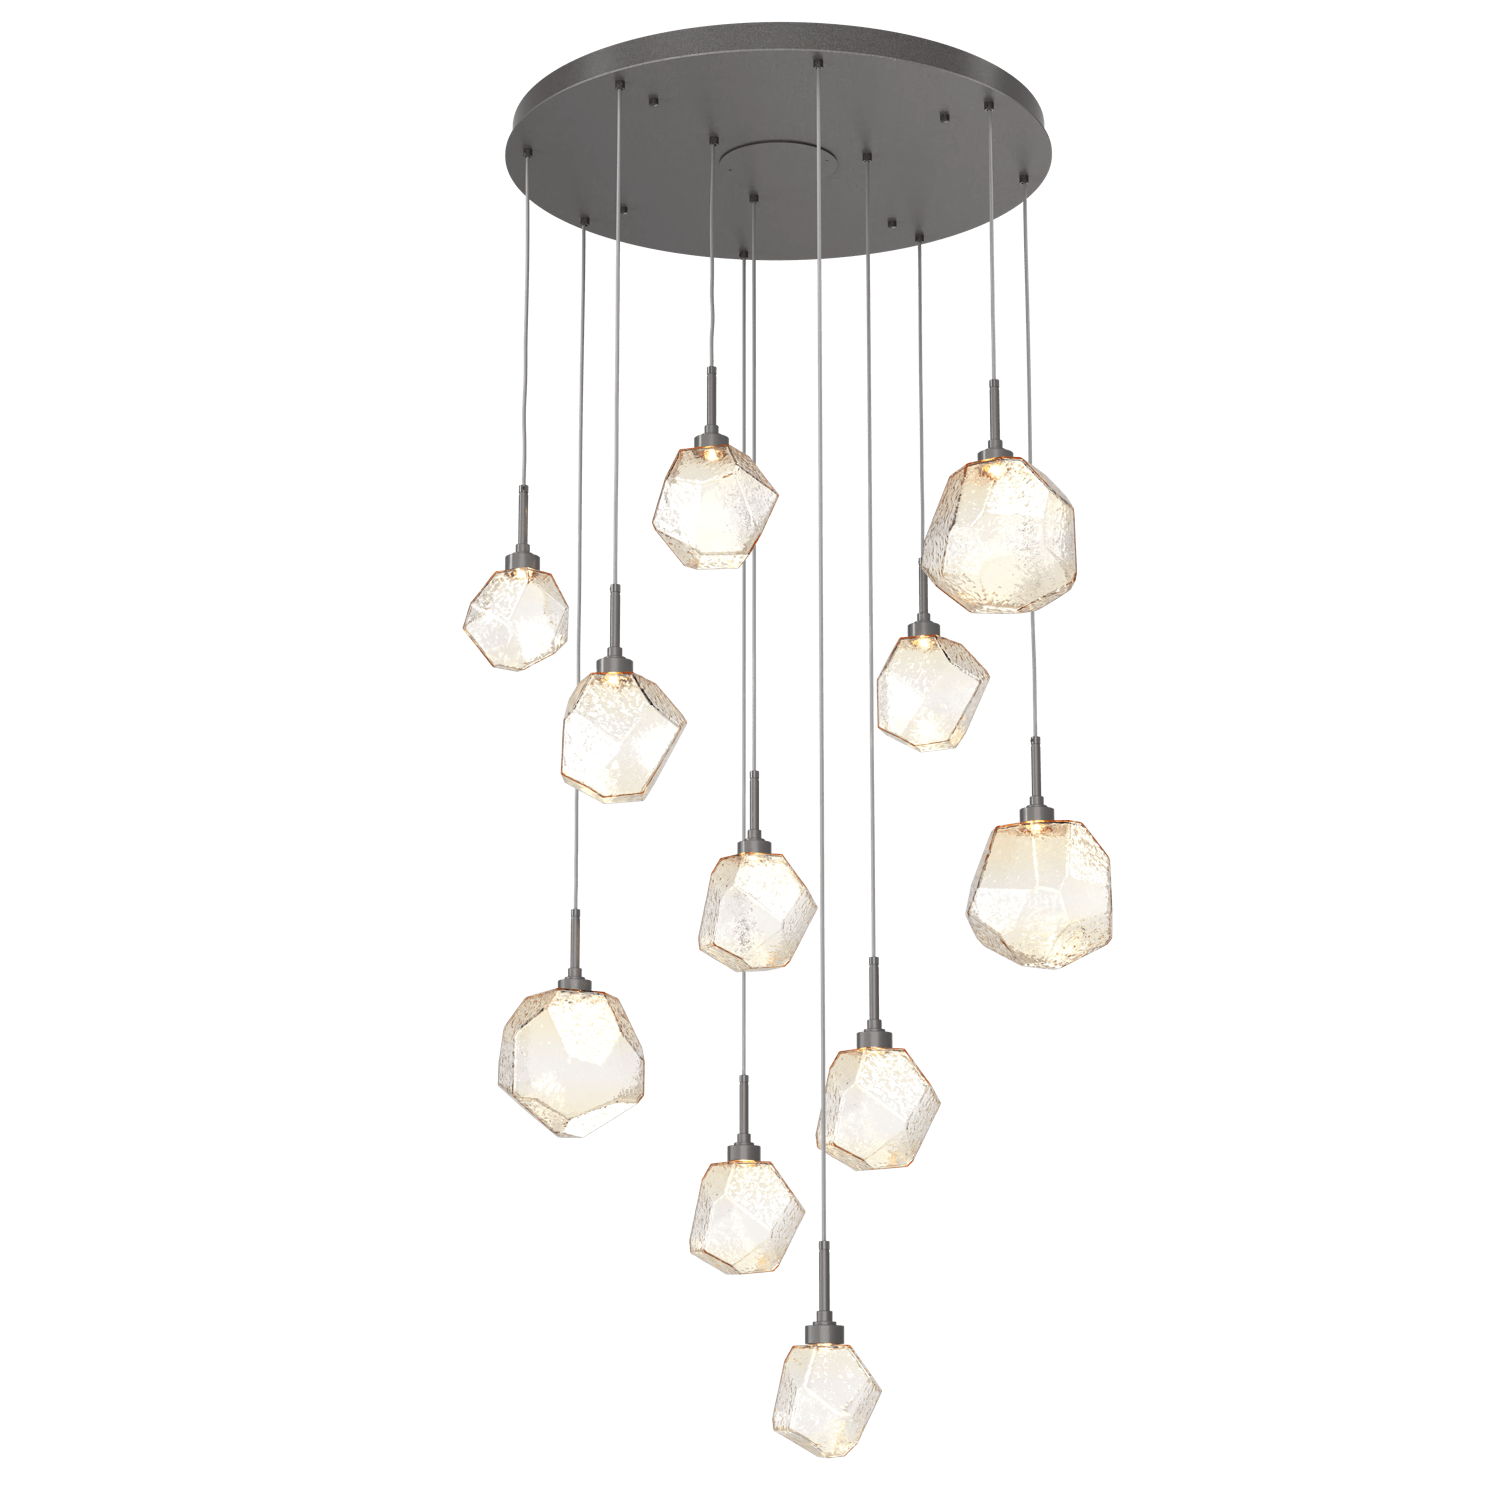 CHB0039-11-GP-A-Hammerton-Studio-Gem-11-light-round-pendant-chandelier-with-graphite-finish-and-amber-blown-glass-shades-and-LED-lamping